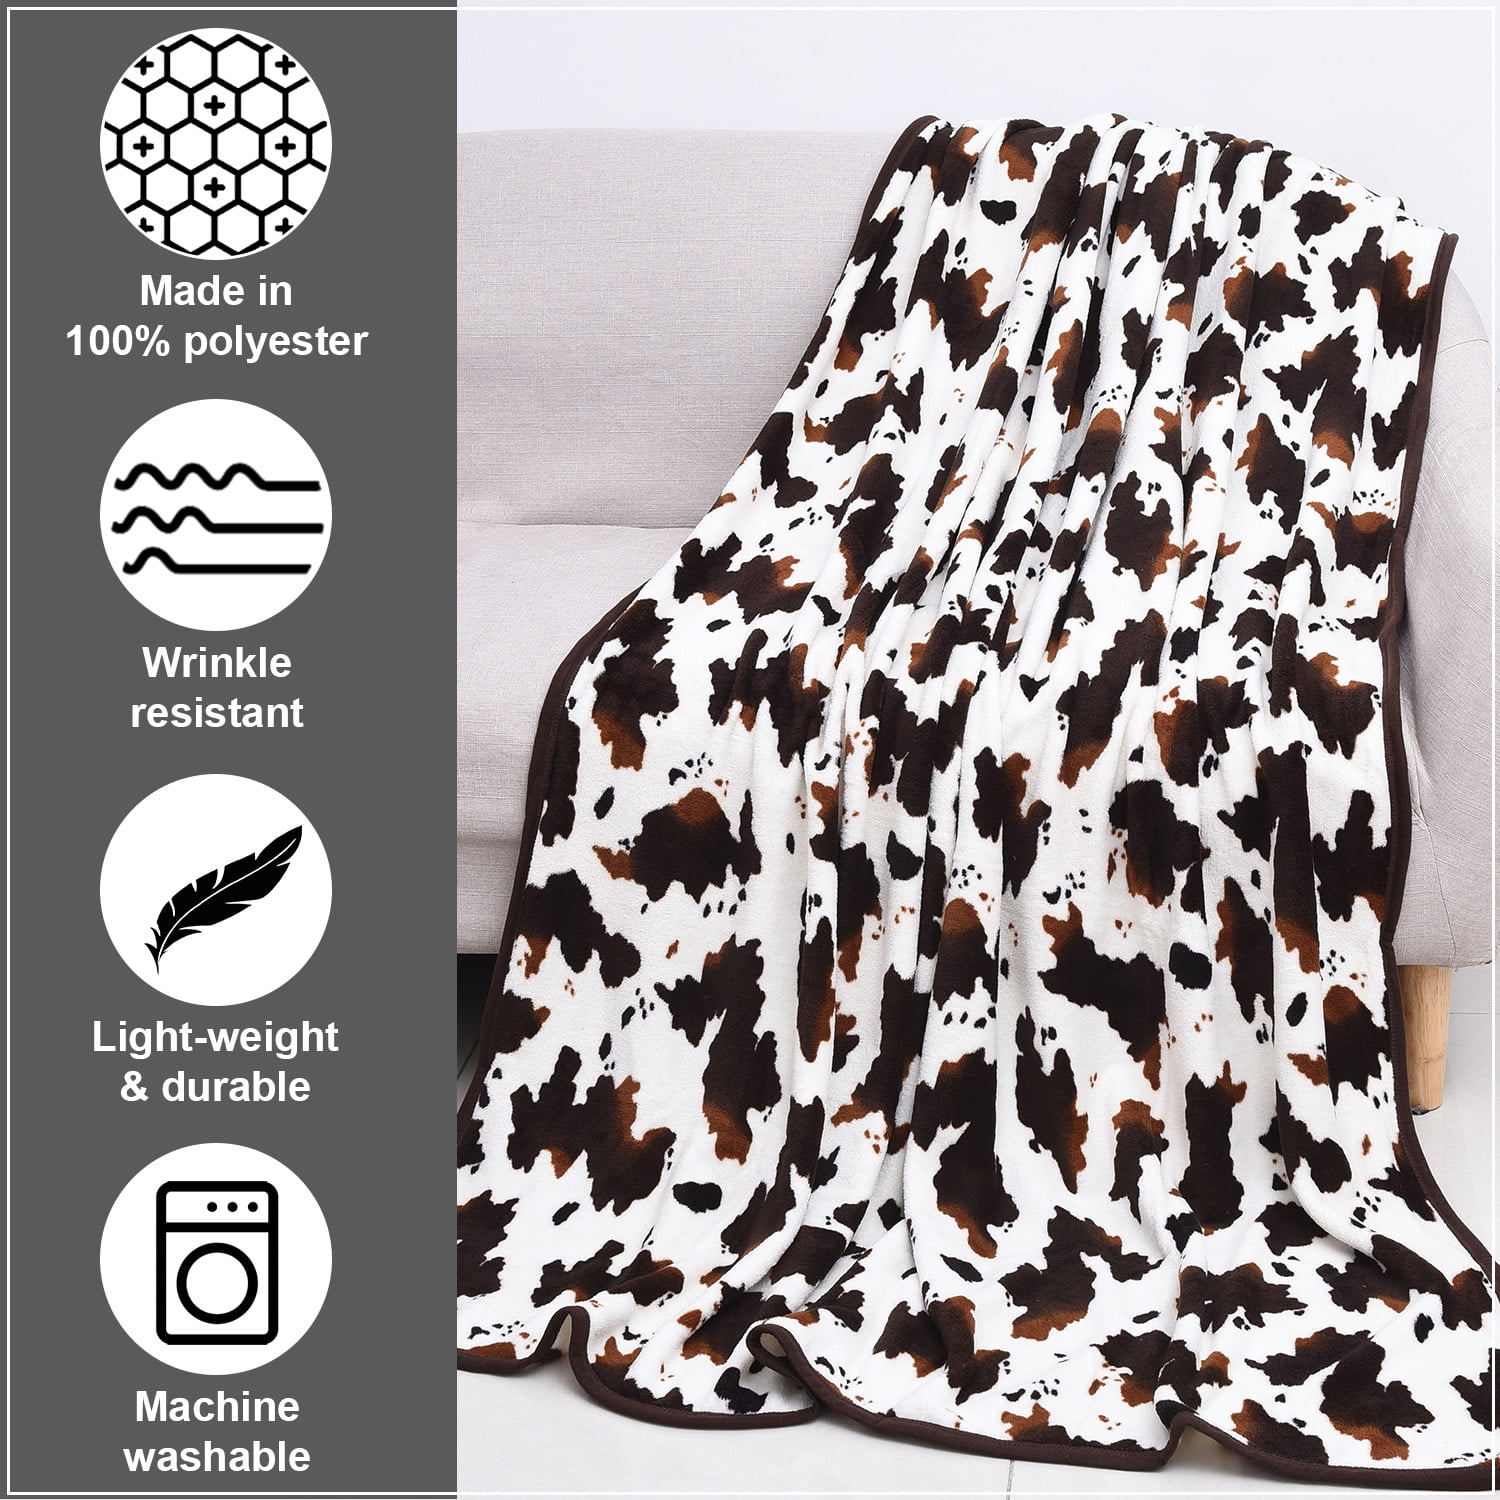 Throw Blanket Farm Animals Horse Cow Fleece Blanket Cozy Lightweight Bed Blanket Women Men 60x50 Plush Home Decoration for Winter and All Seasons 